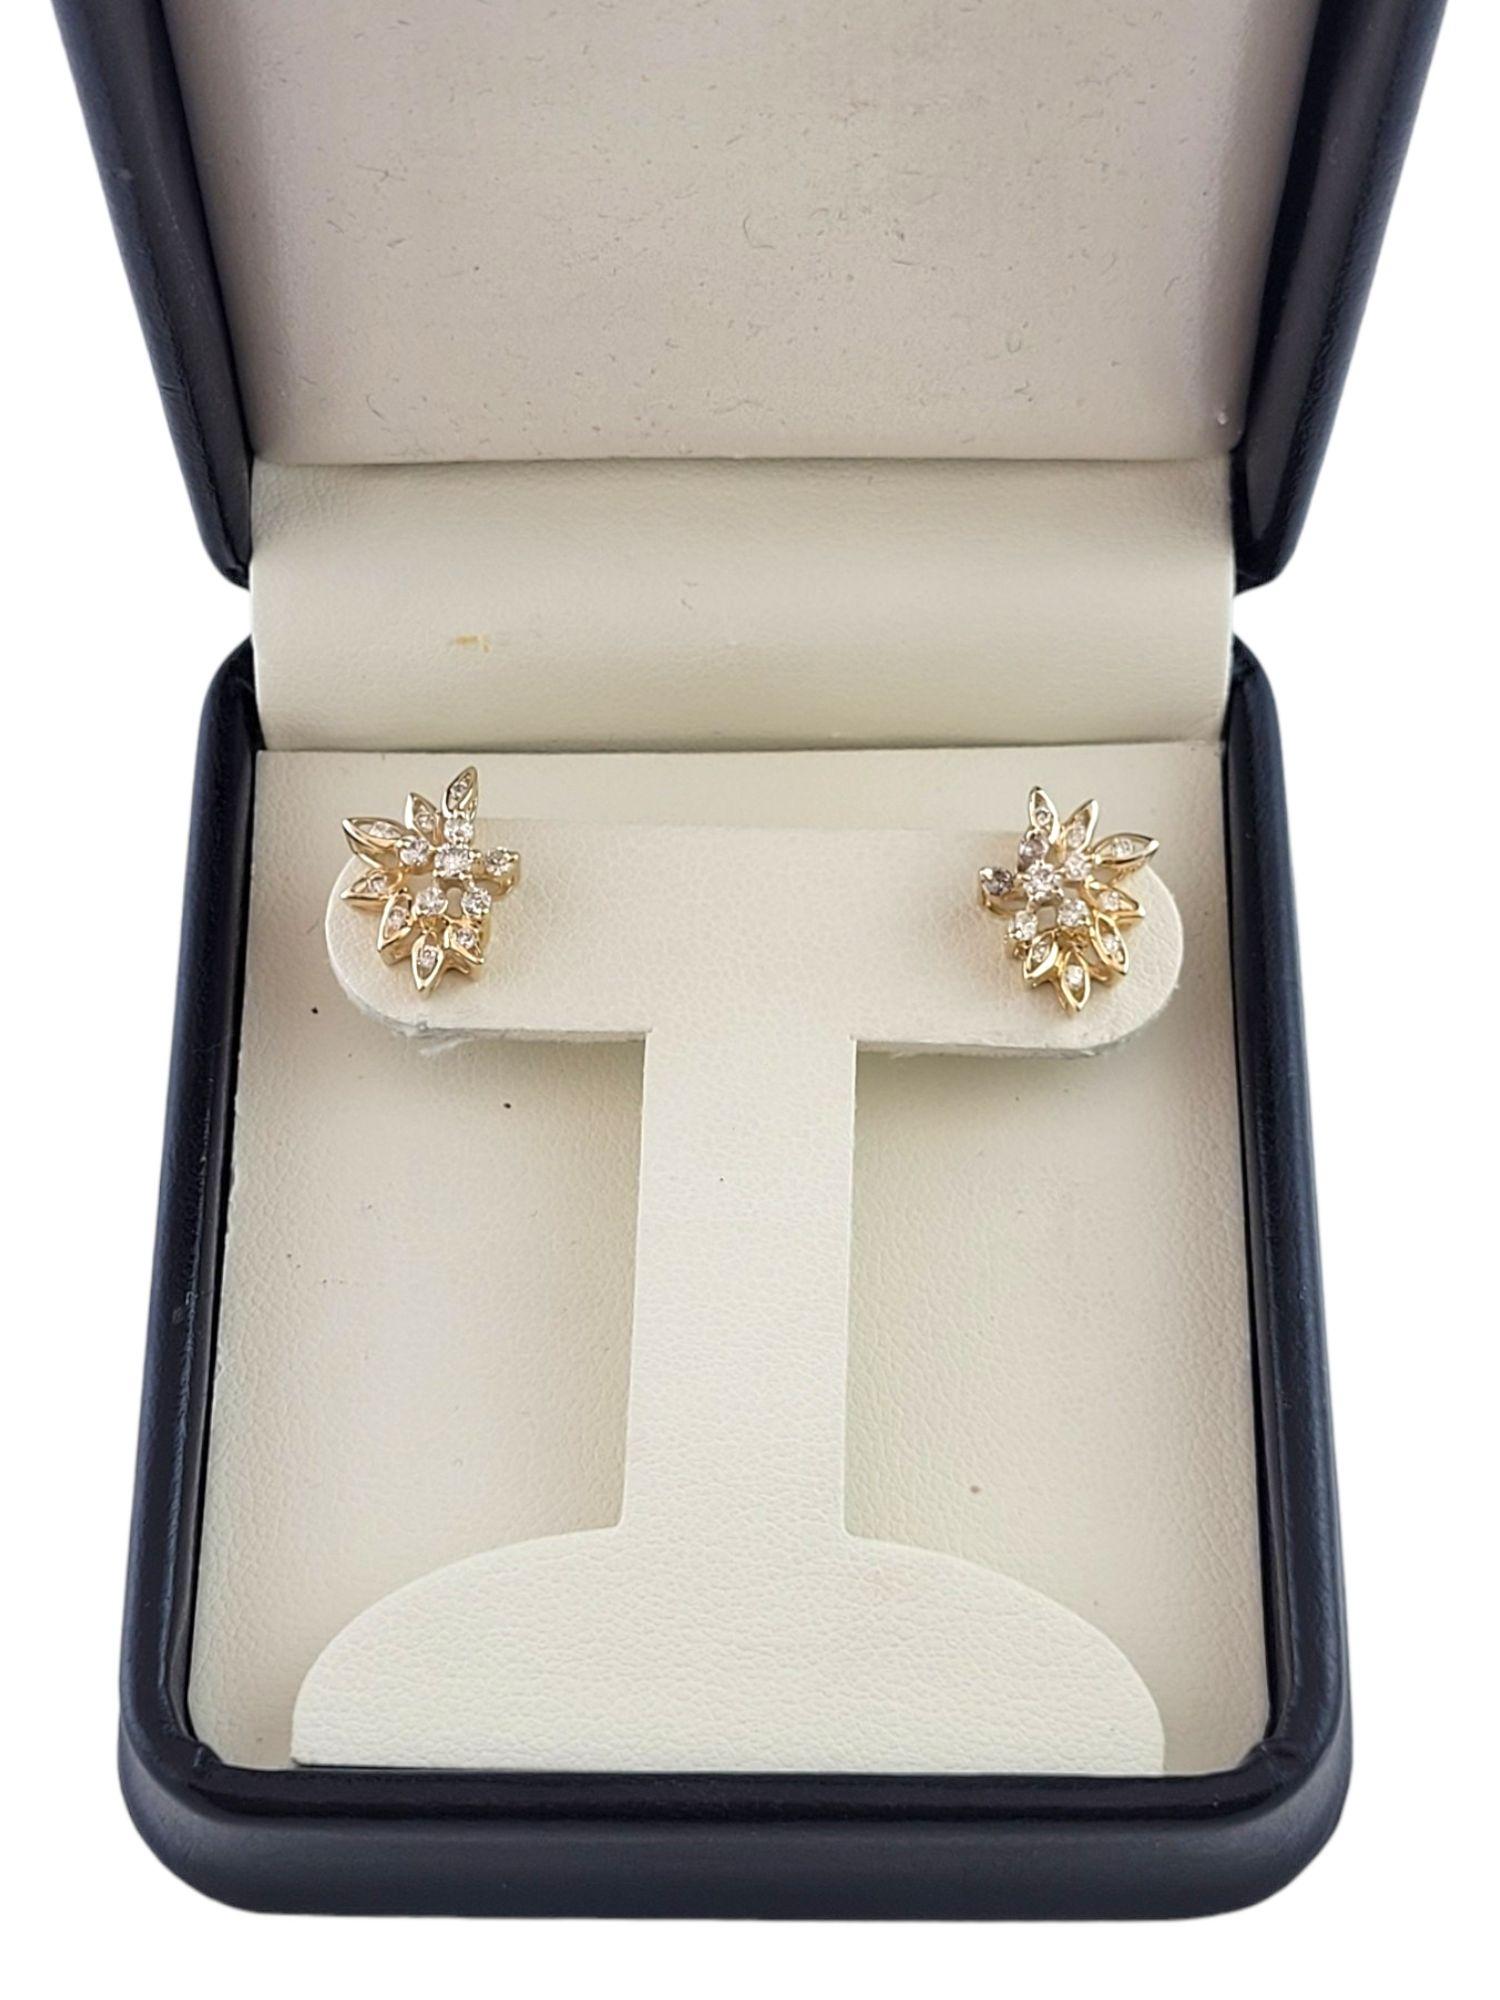 14K Yellow Gold Diamond Earrings #14827 In Good Condition For Sale In Washington Depot, CT